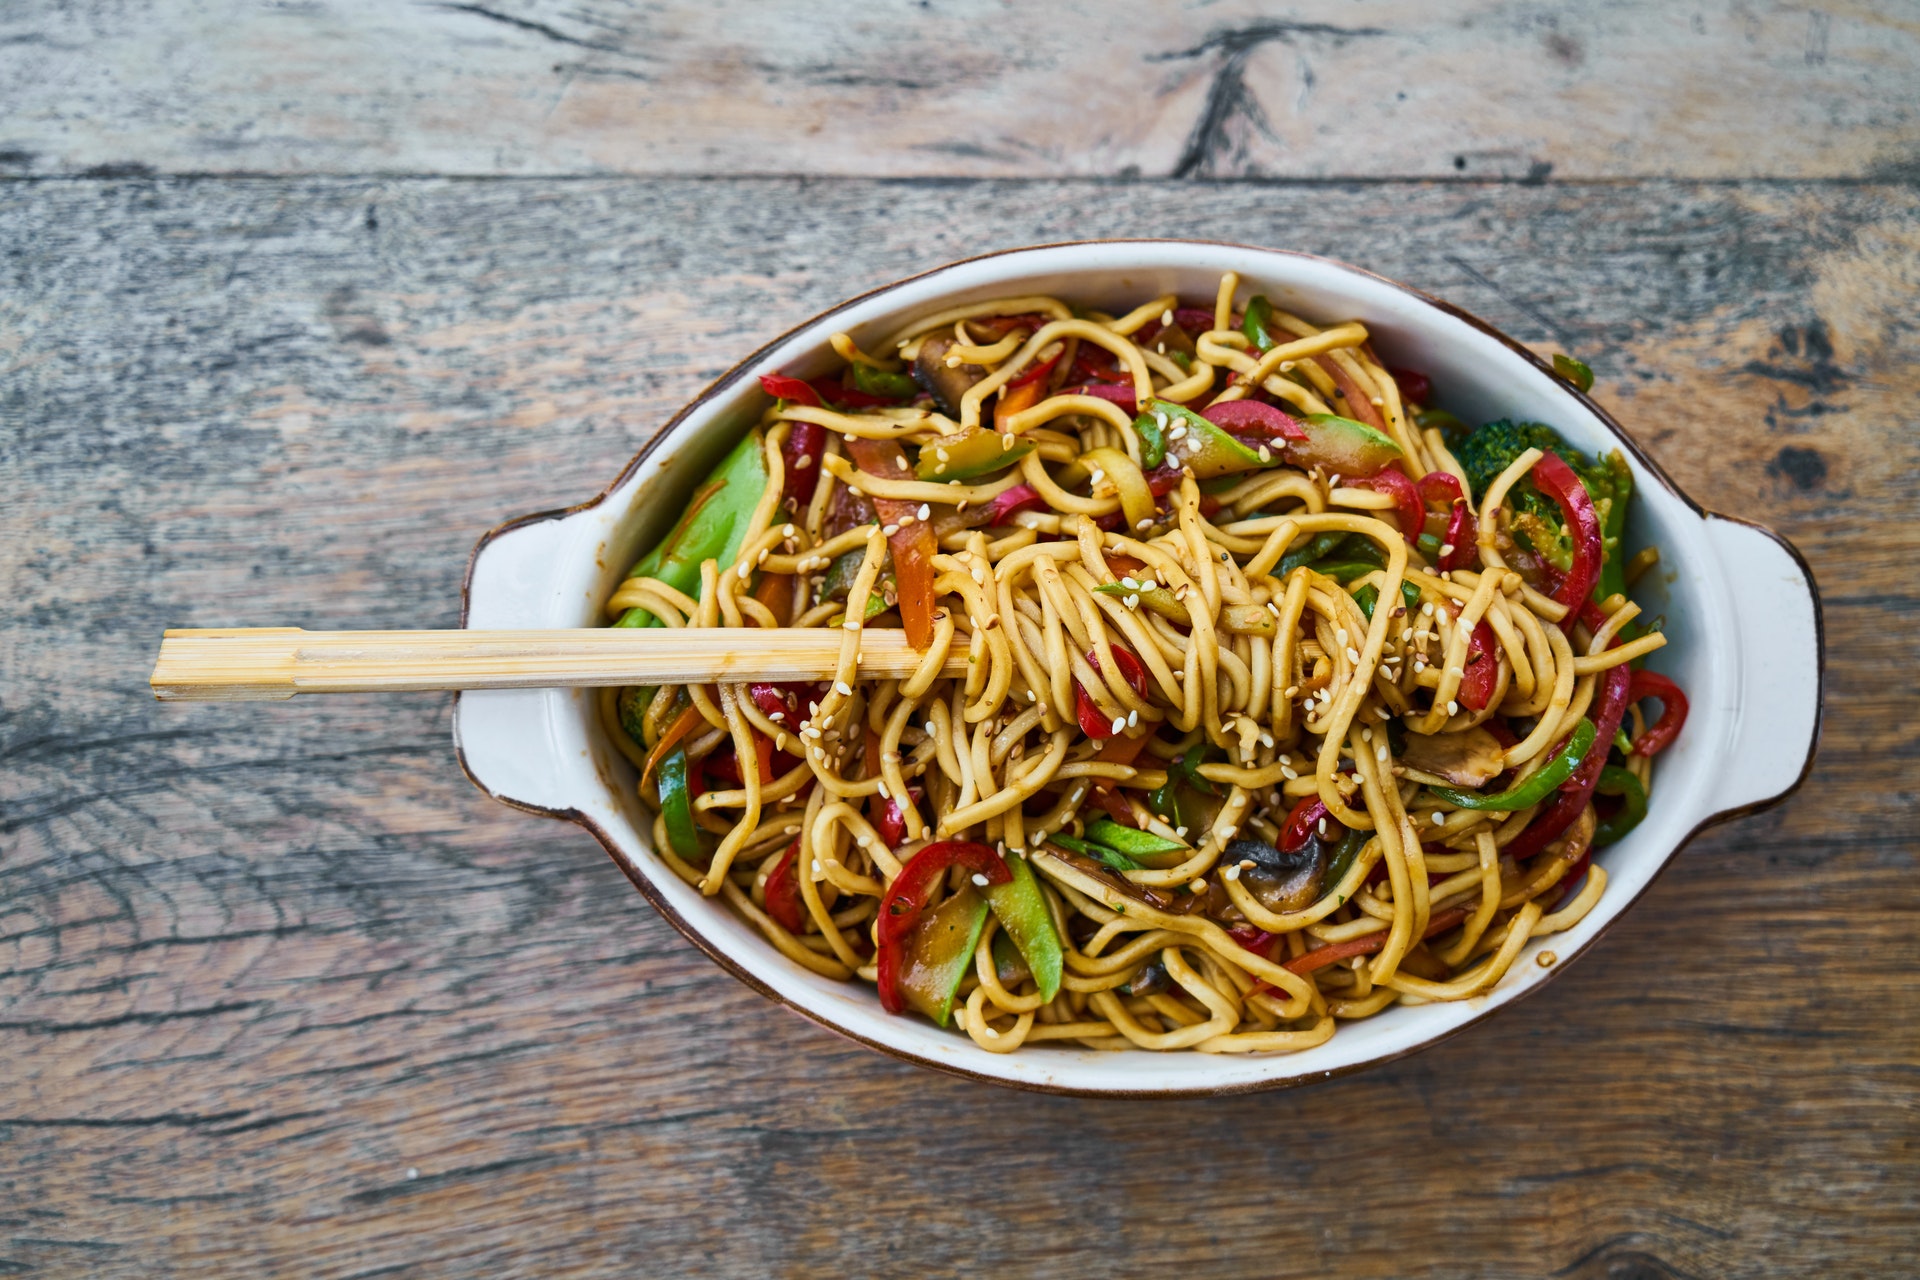 A bowl of stir fried noodles and vegetables with chopsticks on a wooden table